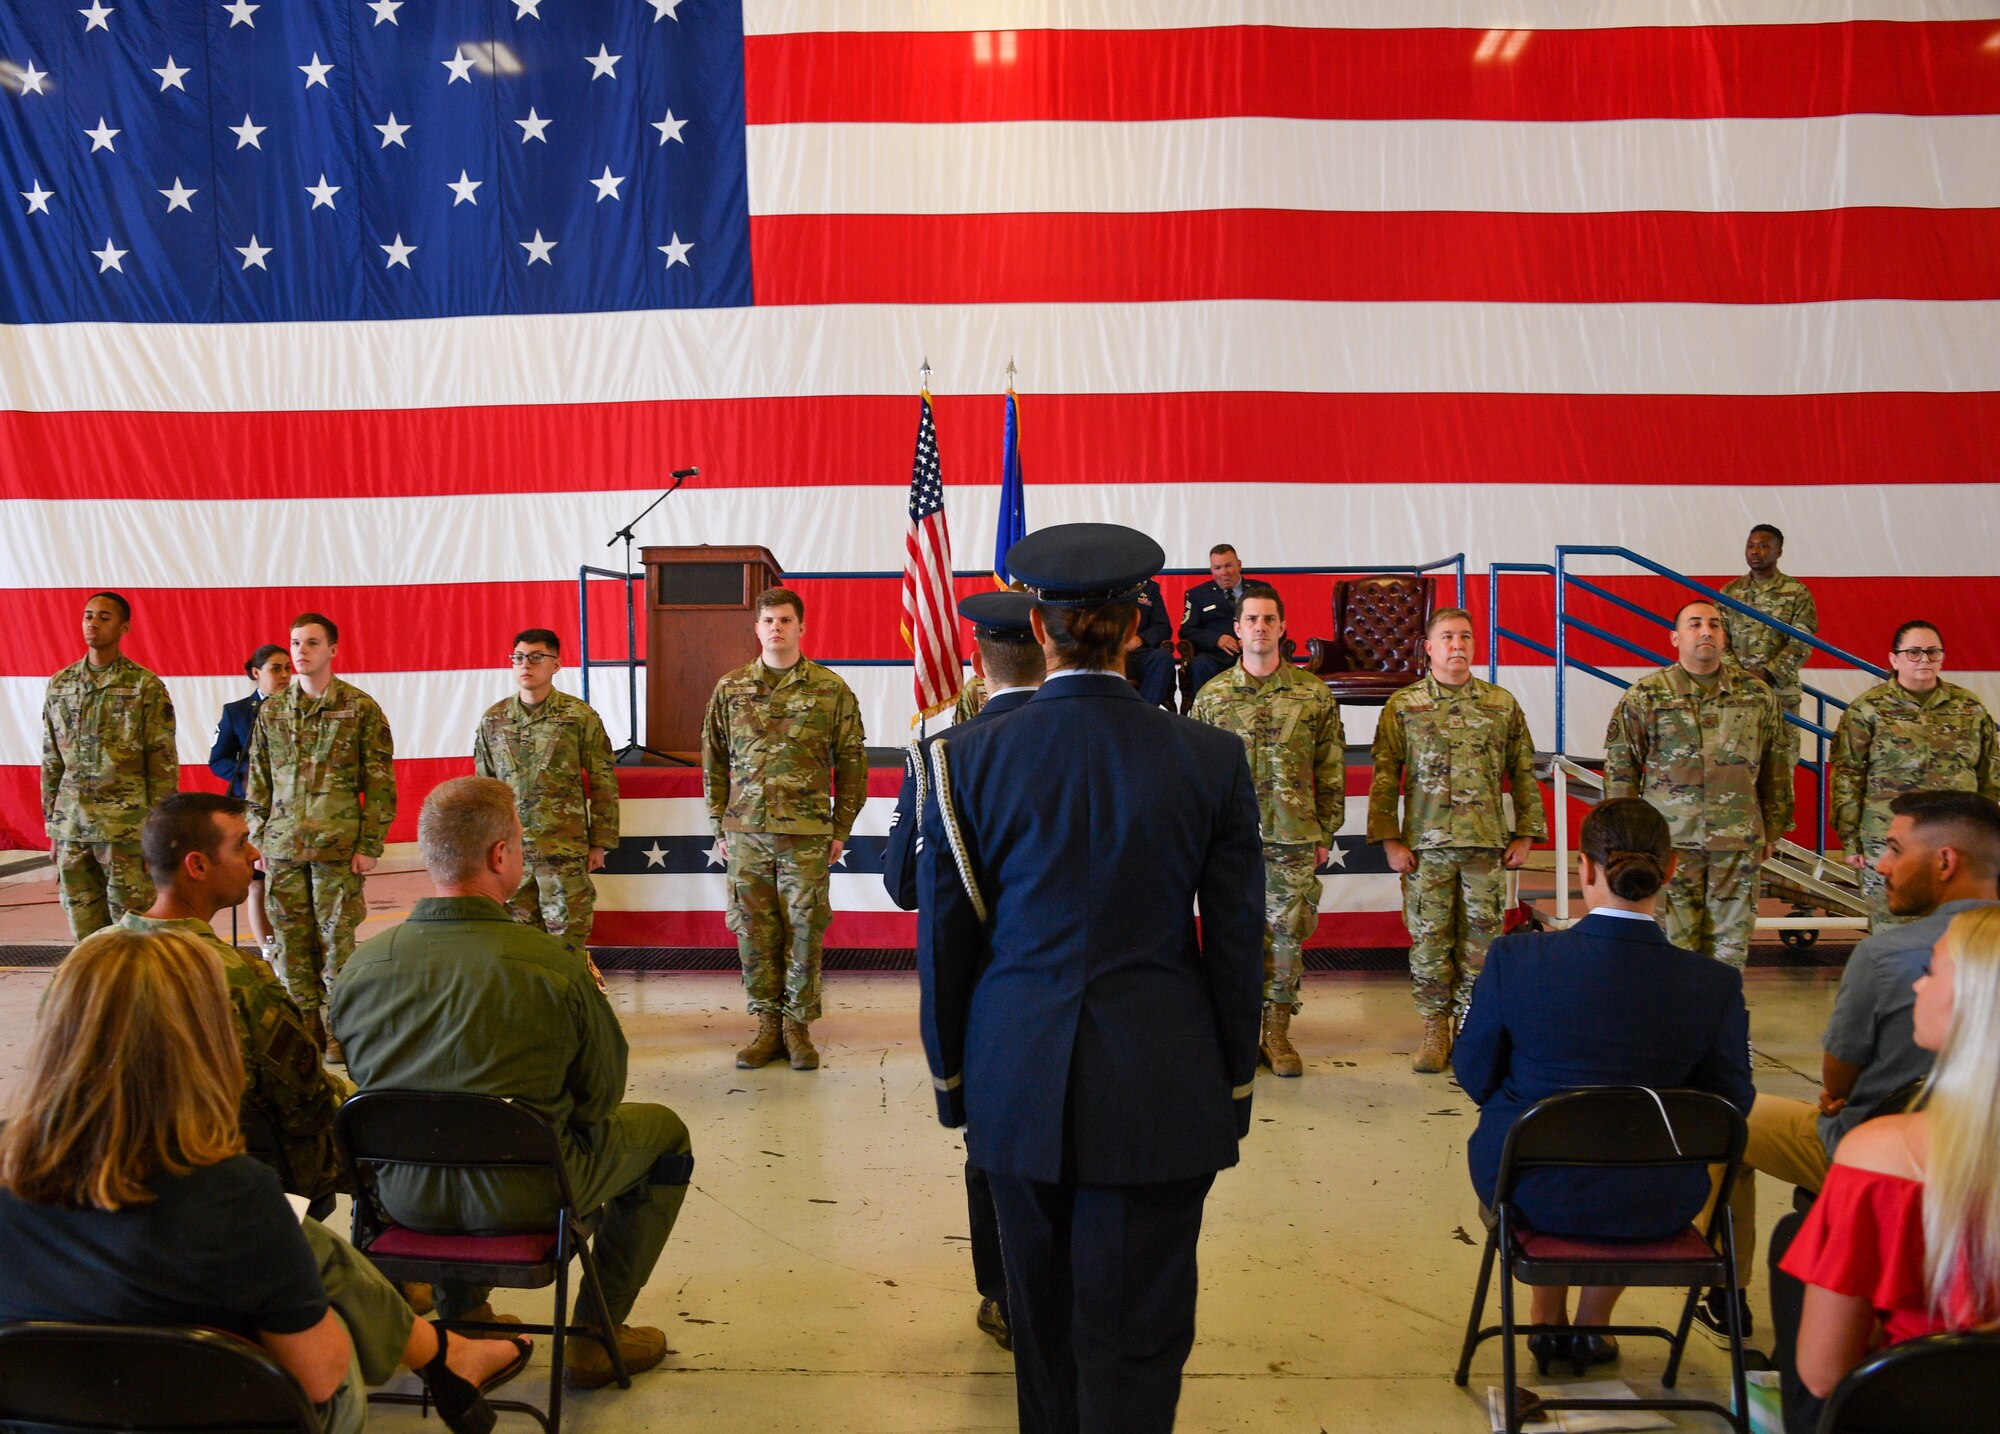 Dyess Air Force Base Honor Guard members prepare to fold the flag during a retirement ceremony at Naval Air Station Joint Reserve Base Fort Worth, Texas, June 4, 2022. Chief Master Sgt. Mclain received his flag after honorably serving for 27 years. (U.S. Air Force photo by Staff Sgt. Nije Hightower)